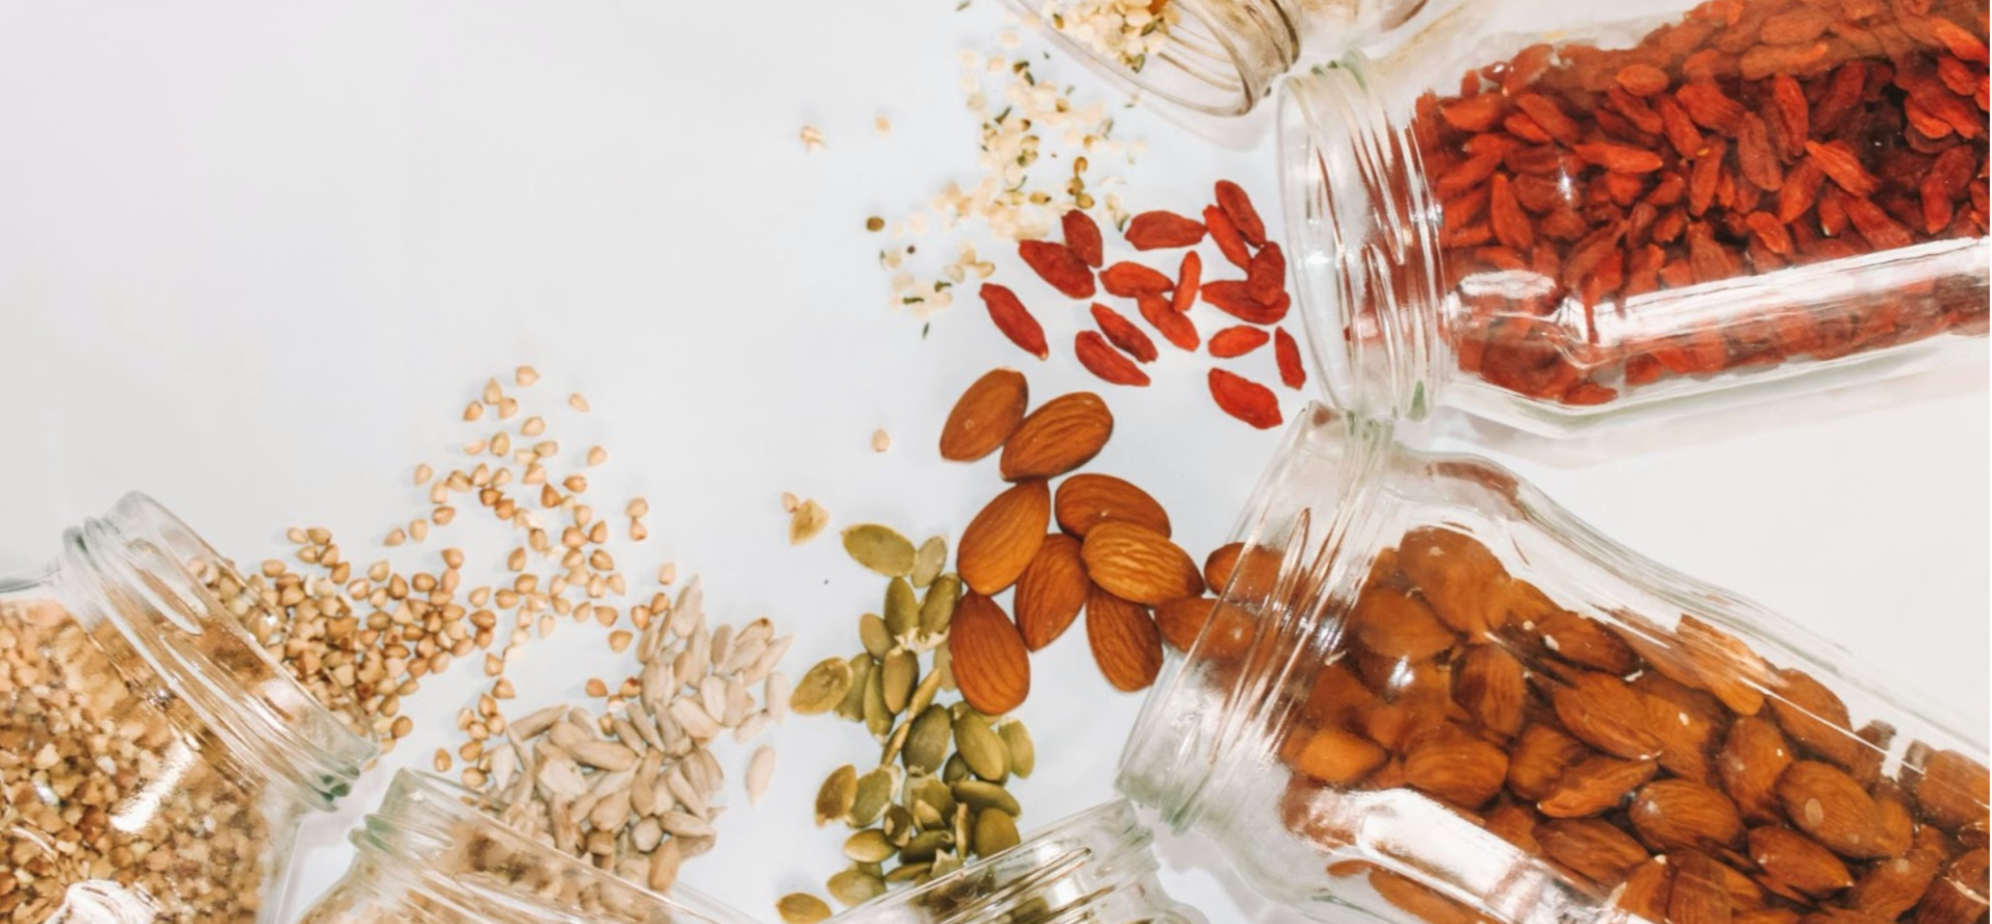 Superfoods, including nuts and seeds for health at Christmas